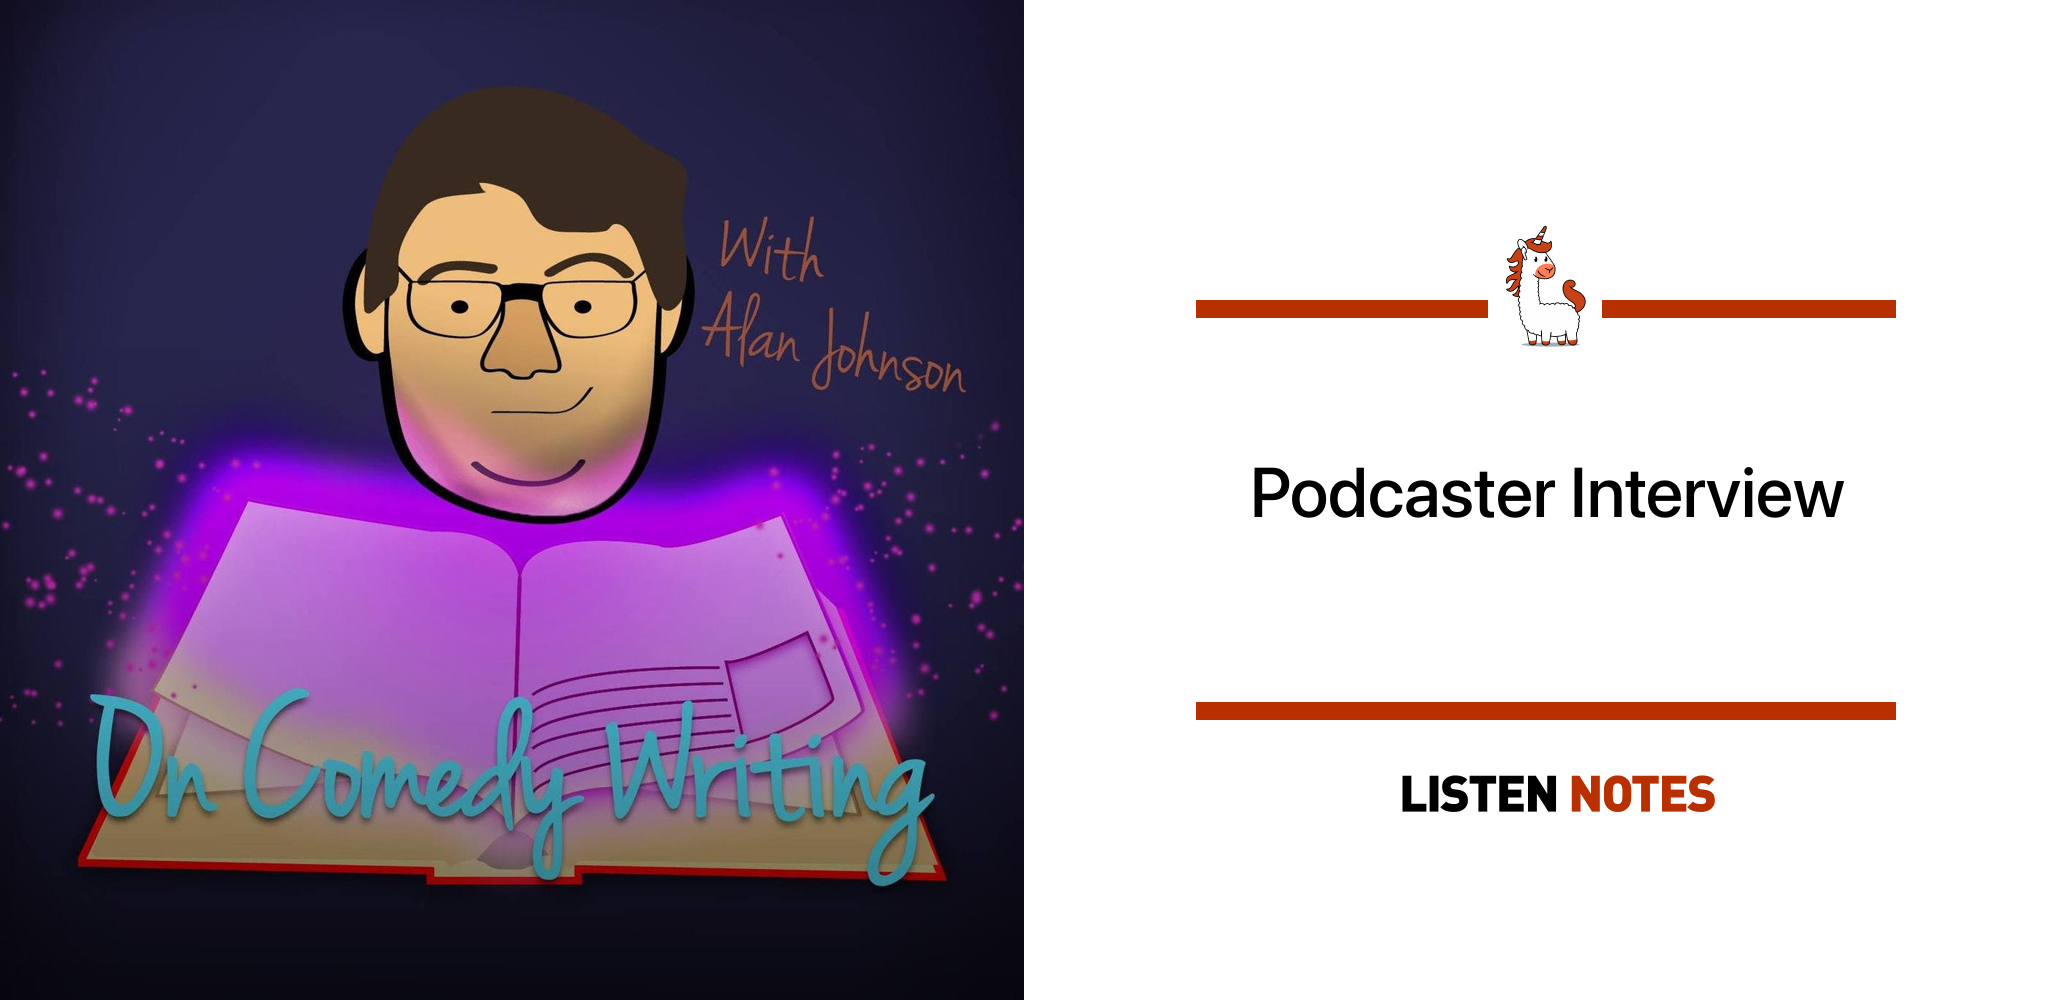 On Comedy Writing (podcast) - Alan Johnson  Listen Notes